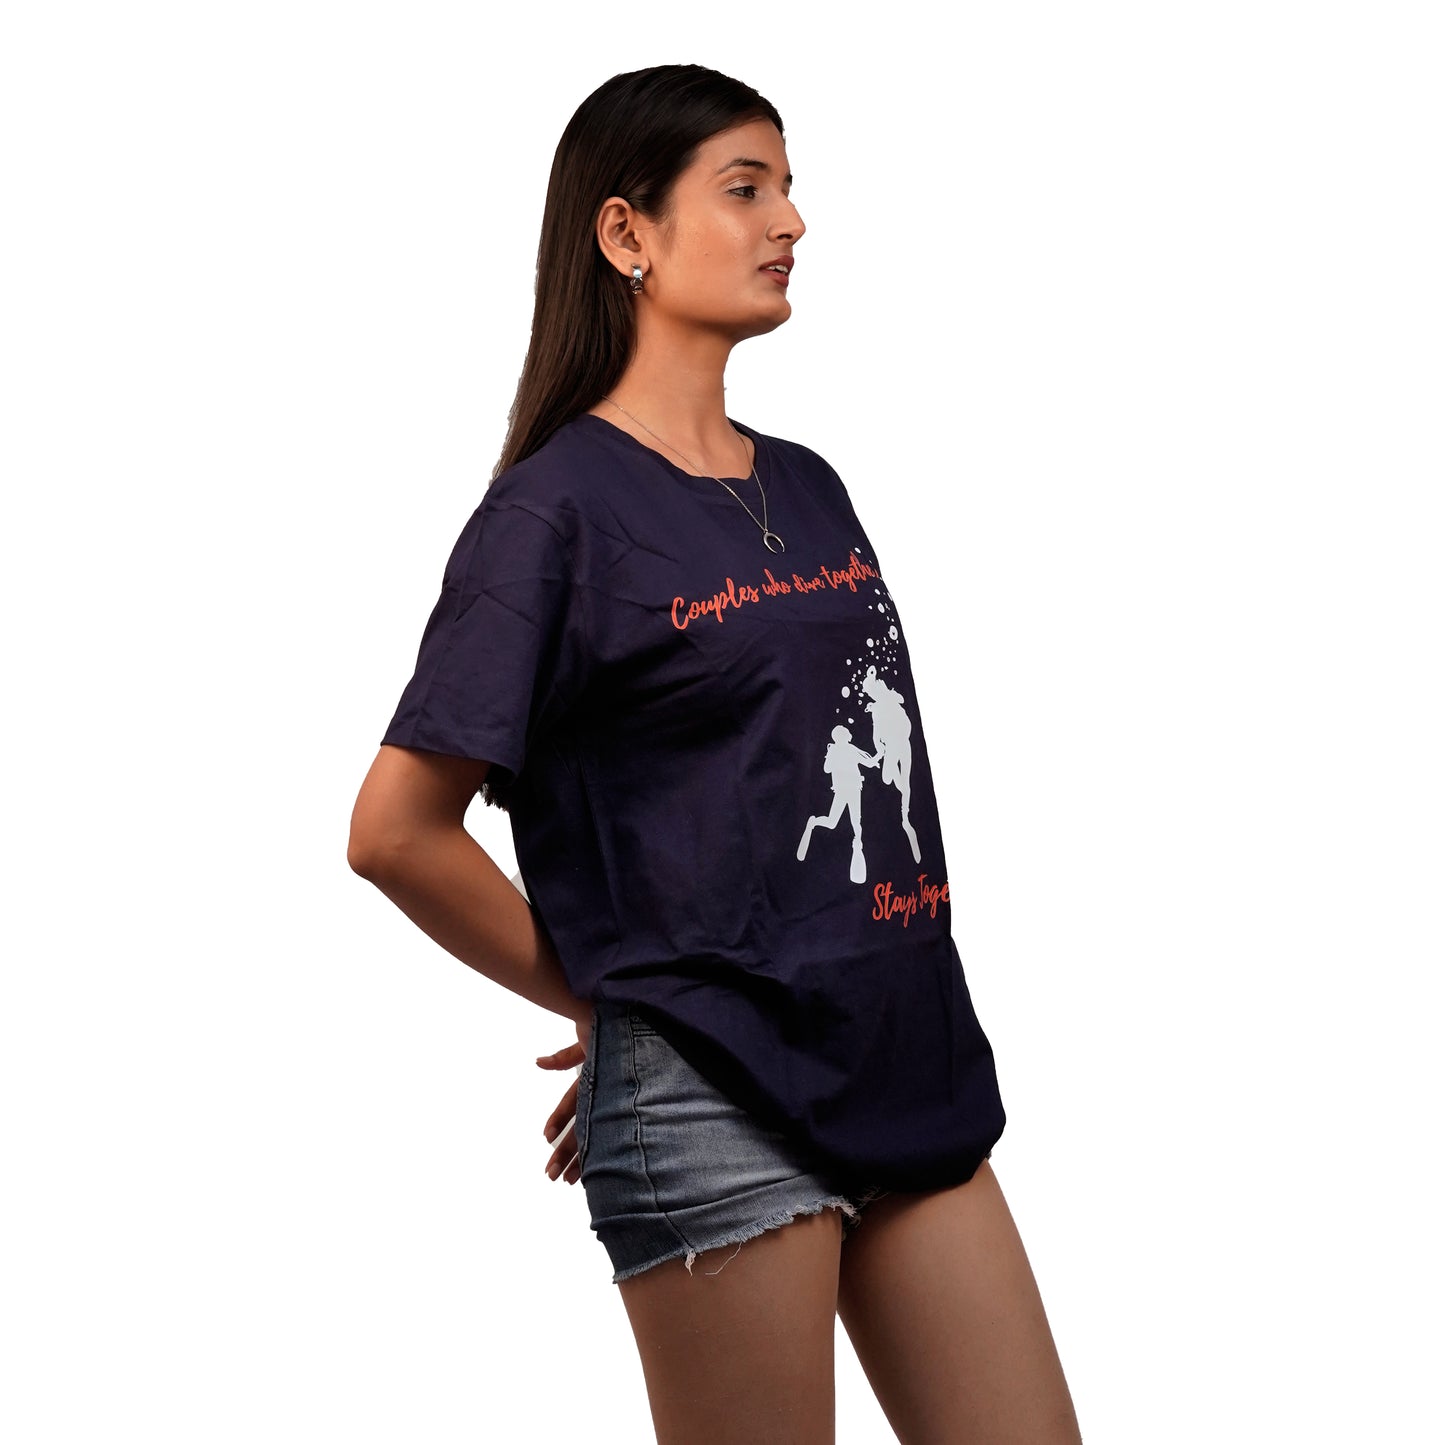 Couple Diving T-shirt In Navy Blue Color For Women